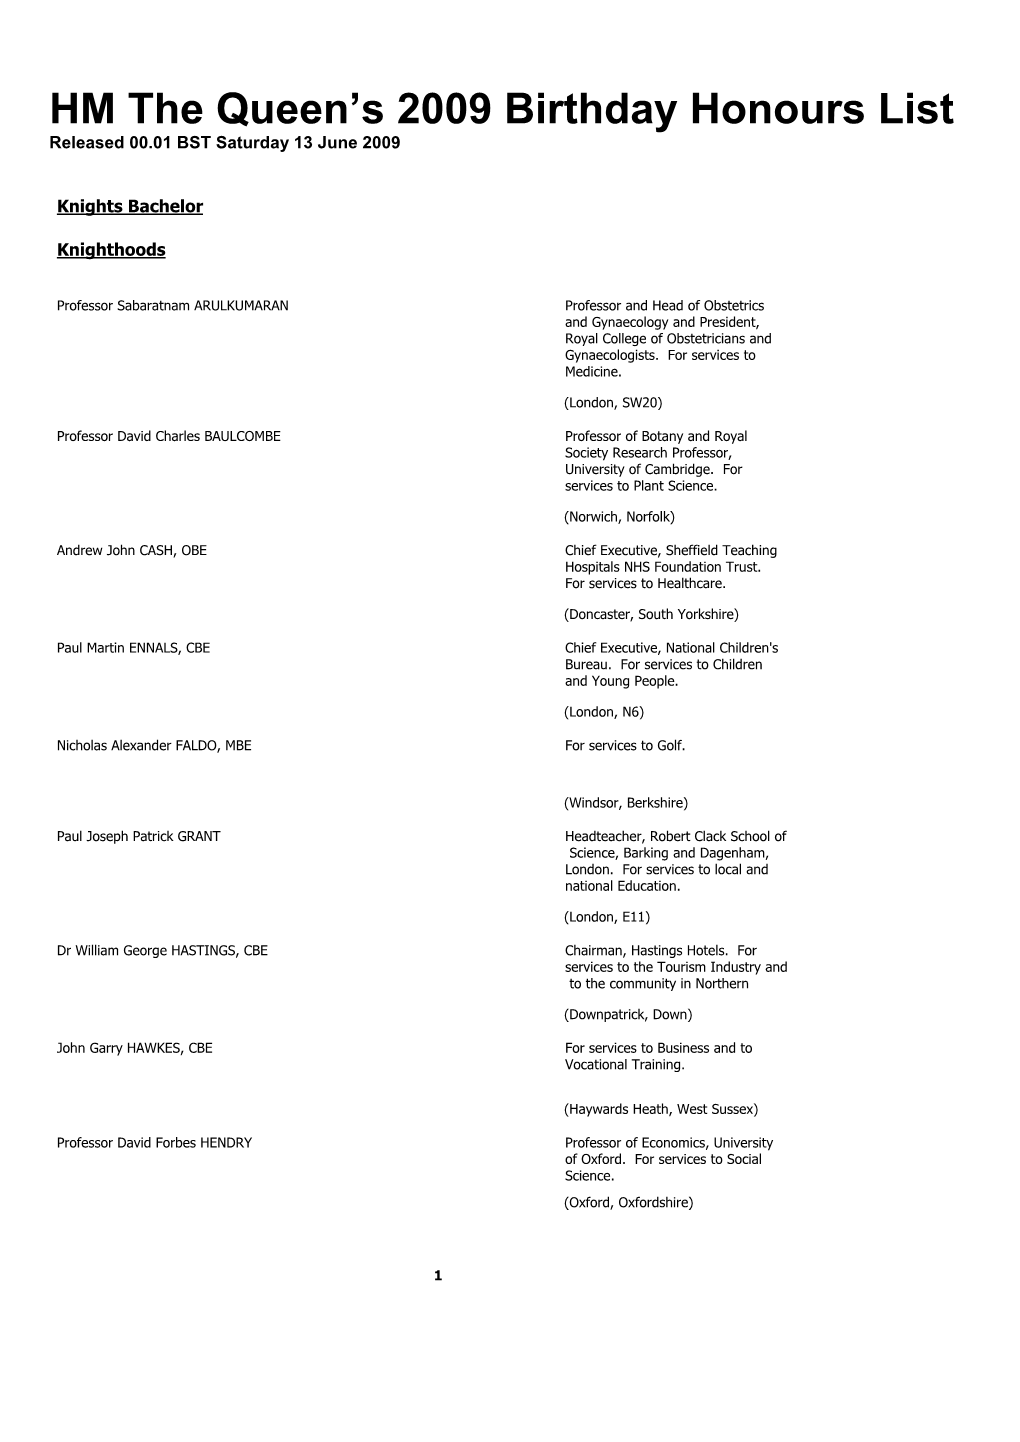 HM the Queen's 2009 Birthday Honours List